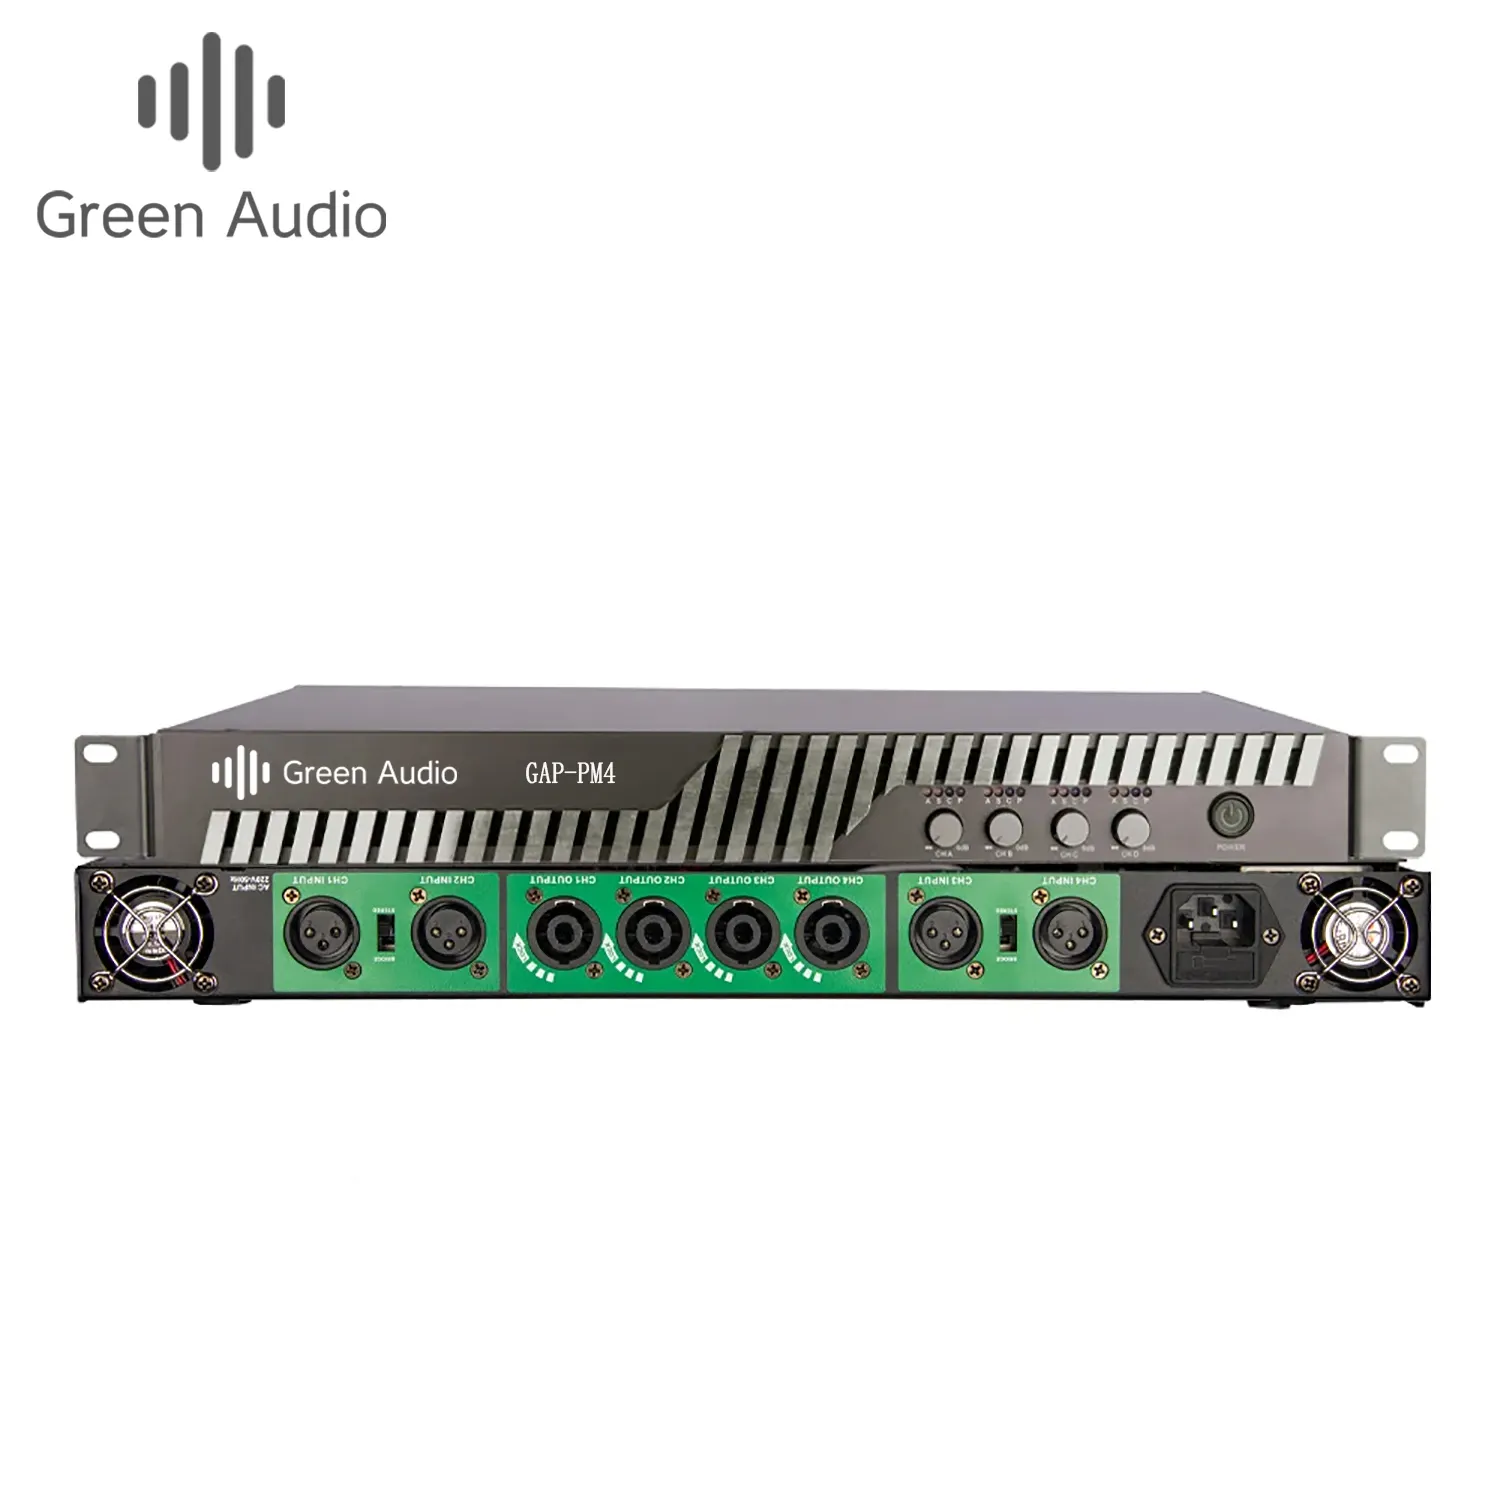 GAP-PM4 Enping ODM/OEM 4 Channel High Quality Professional Amplifiers 5000W*4 Digital Amplifiers Use for DJ stage